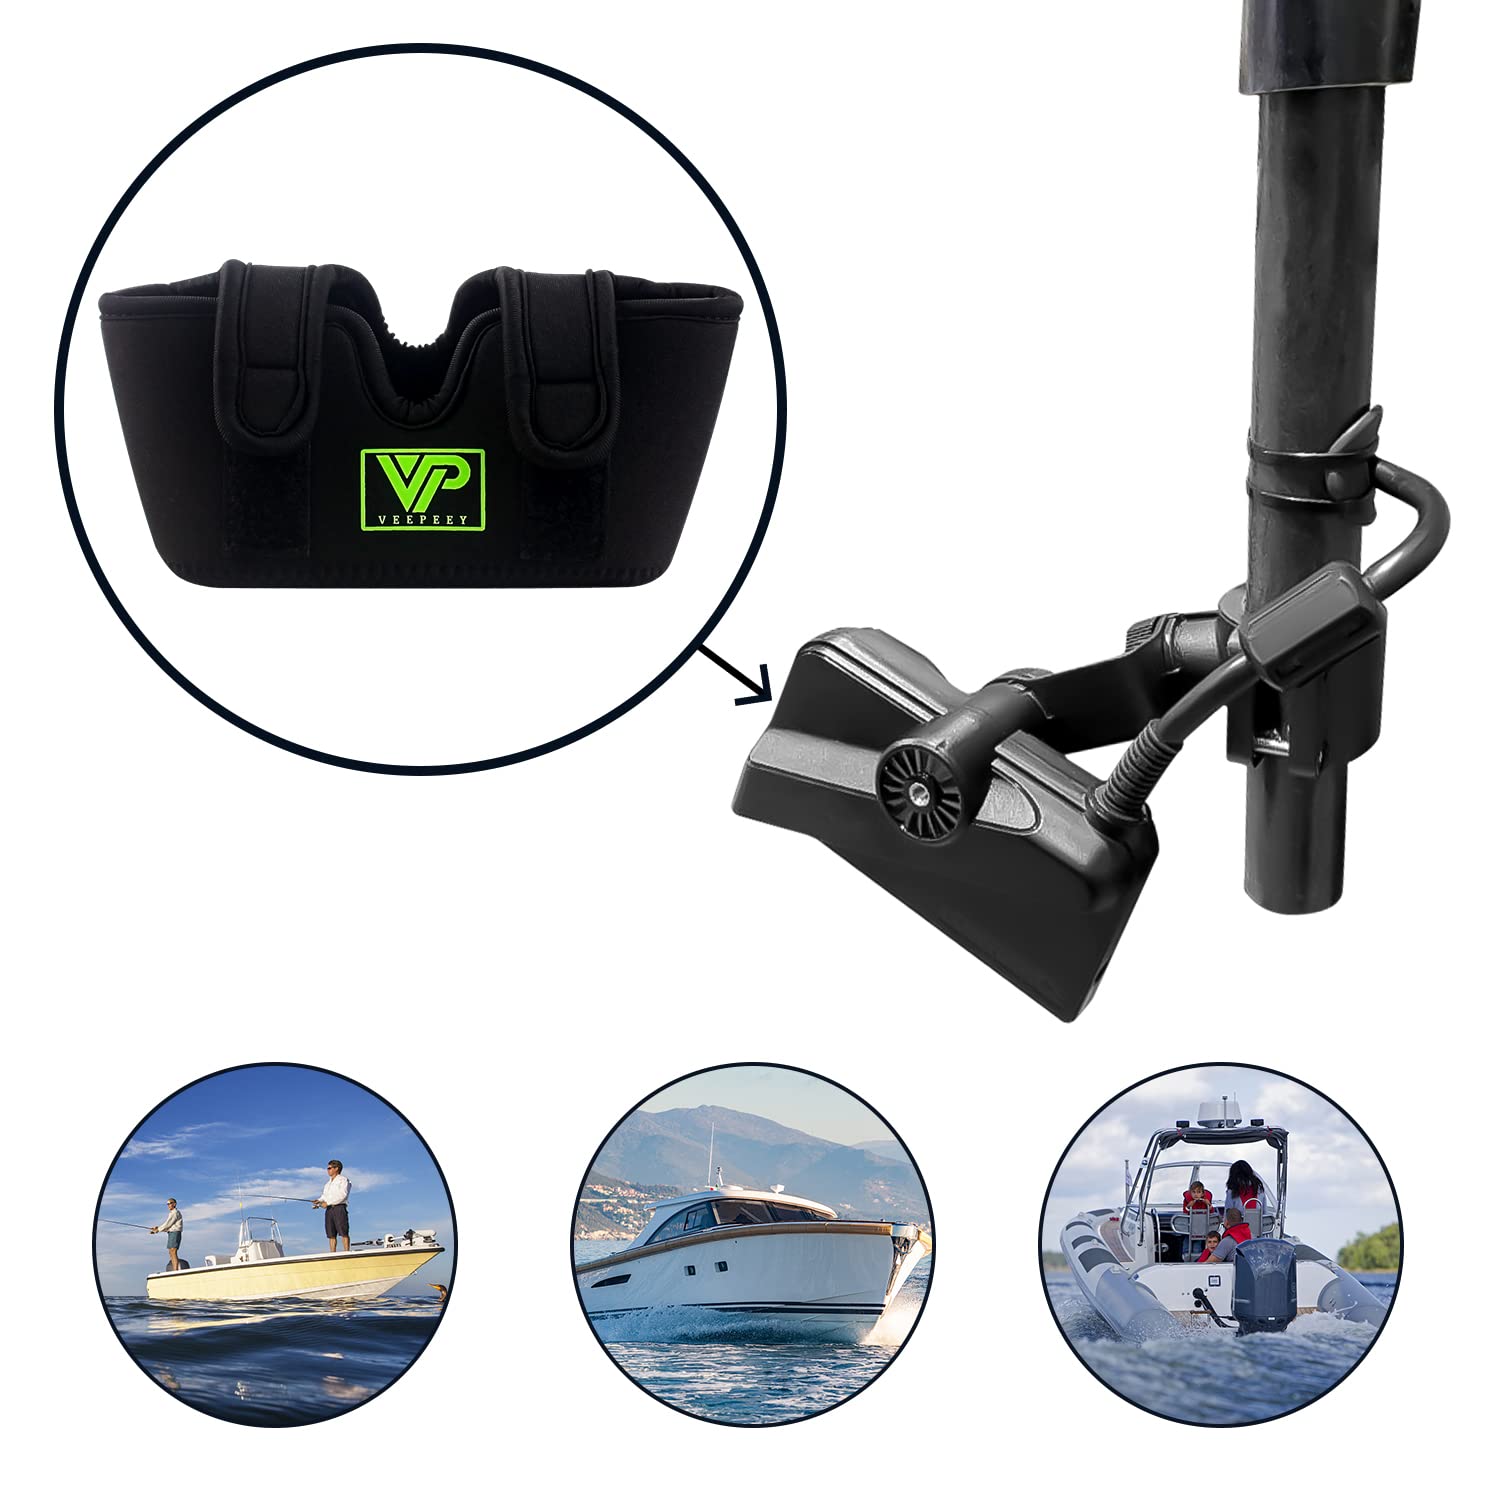 Transducer Cover, Veepeey livescope Cover fit Garmin lvs34 Transducer Lowrance, Travel Transducer Cover Great for Travel to Protect Your Pricey Transducer